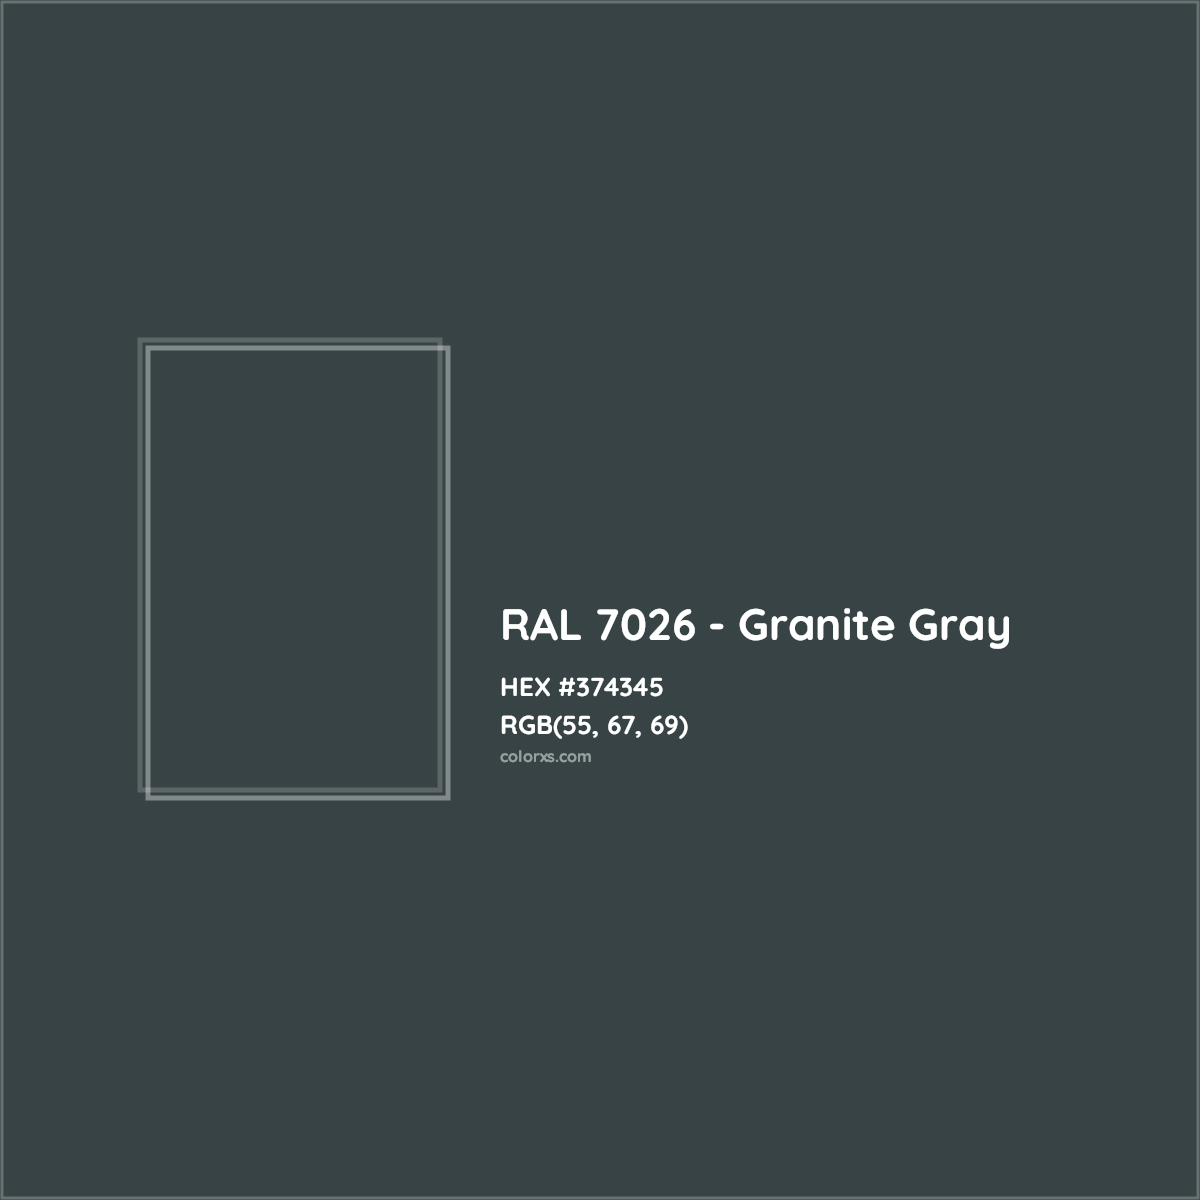 HEX #374345 RAL 7026 - Granite Gray CMS RAL Classic - Color Code